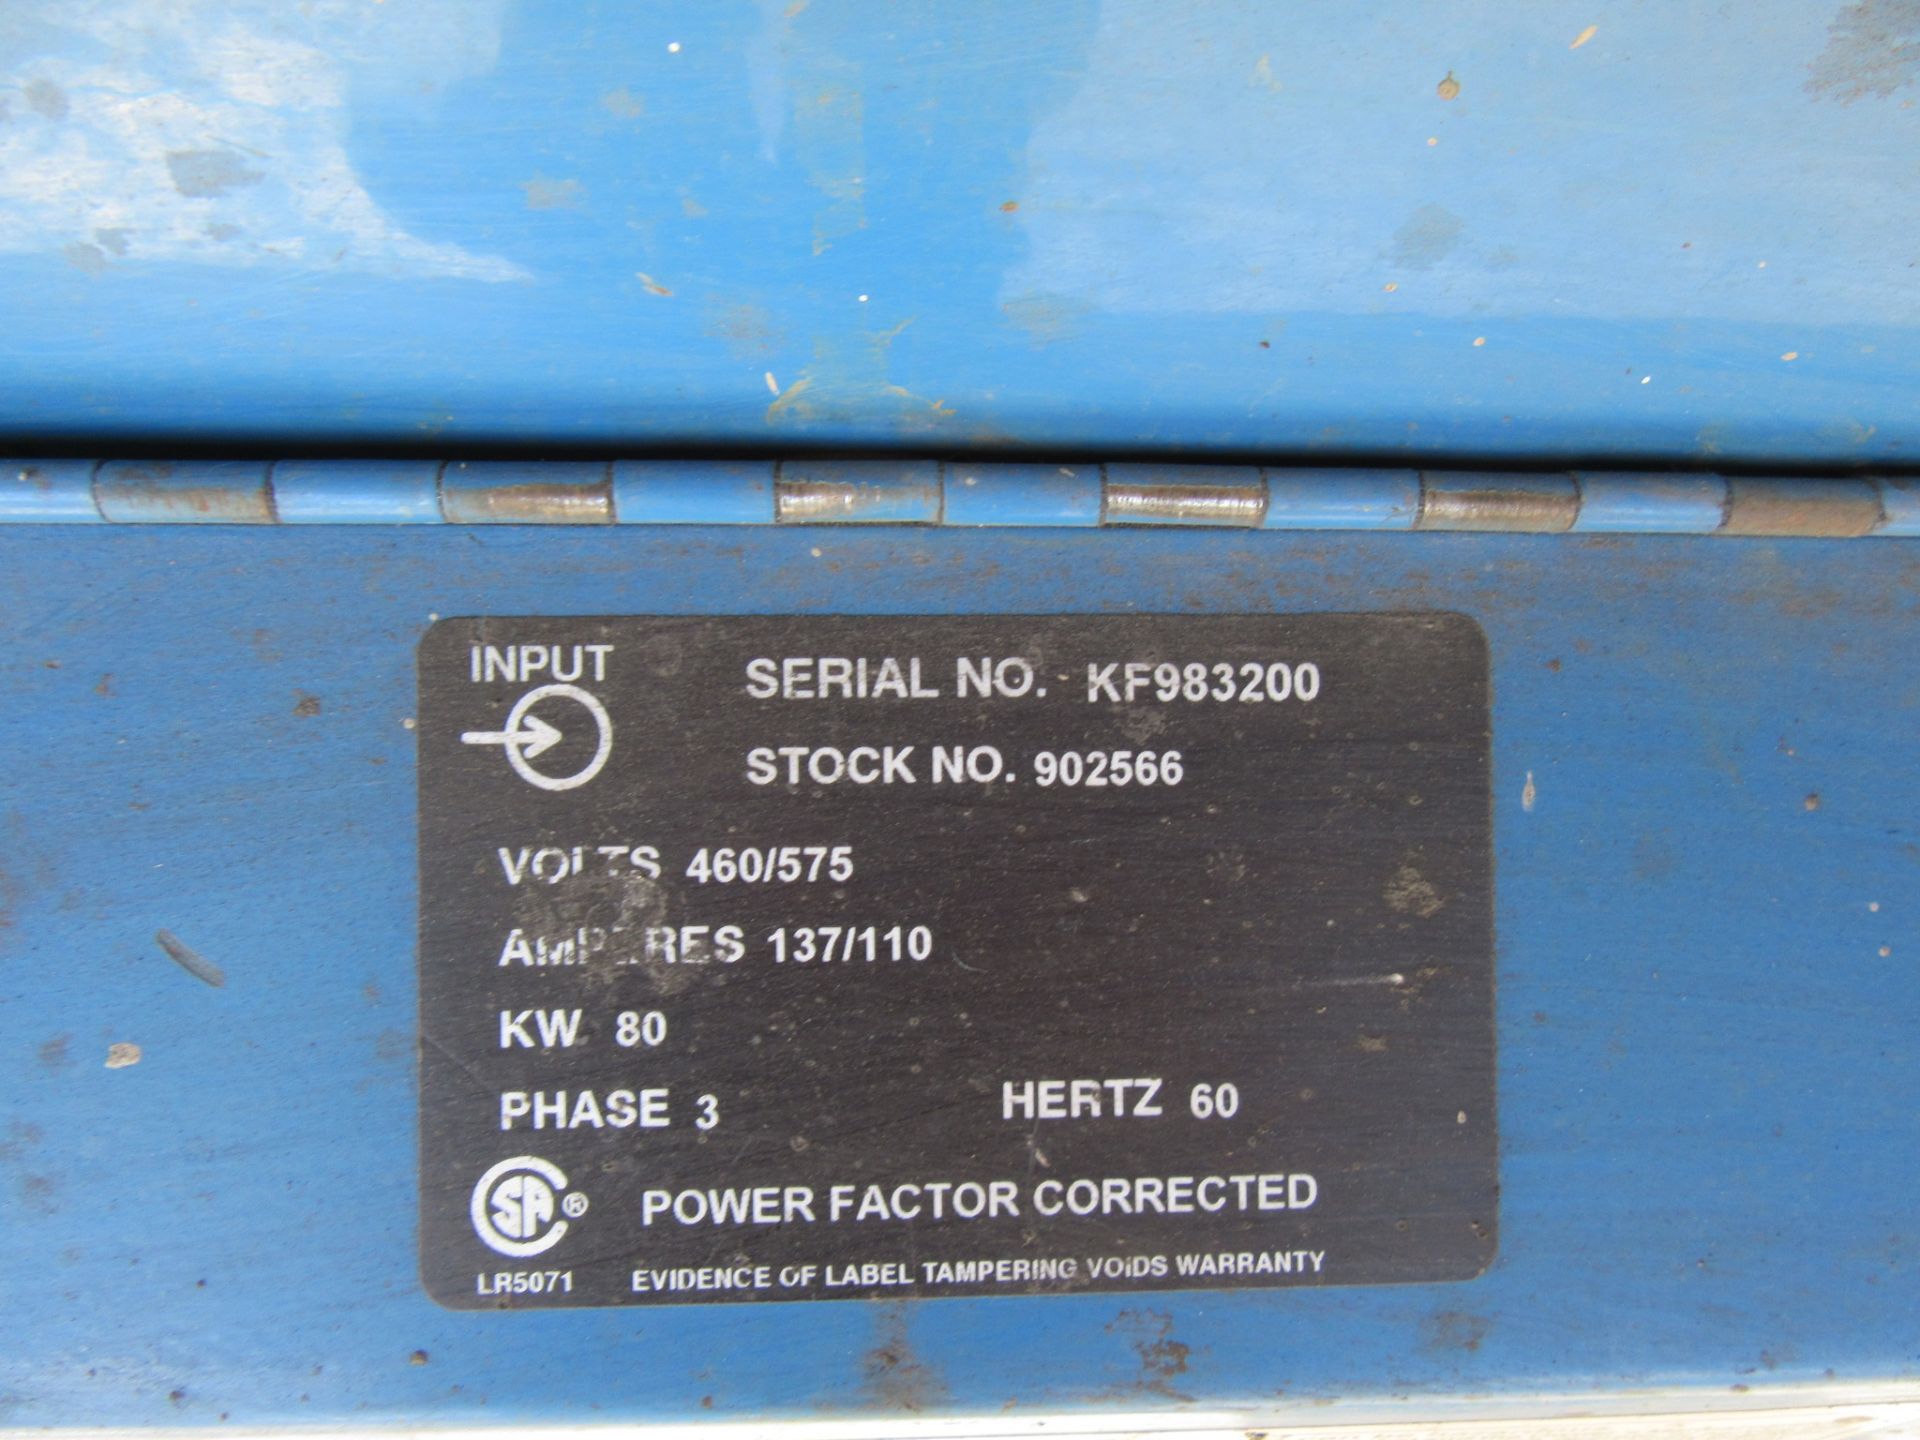 MILLER CP/CC 1500 CONSTANT POTENTIAL/CONSTANT CURRENT DC ARC WELDING POWER SOURCE - Image 3 of 3